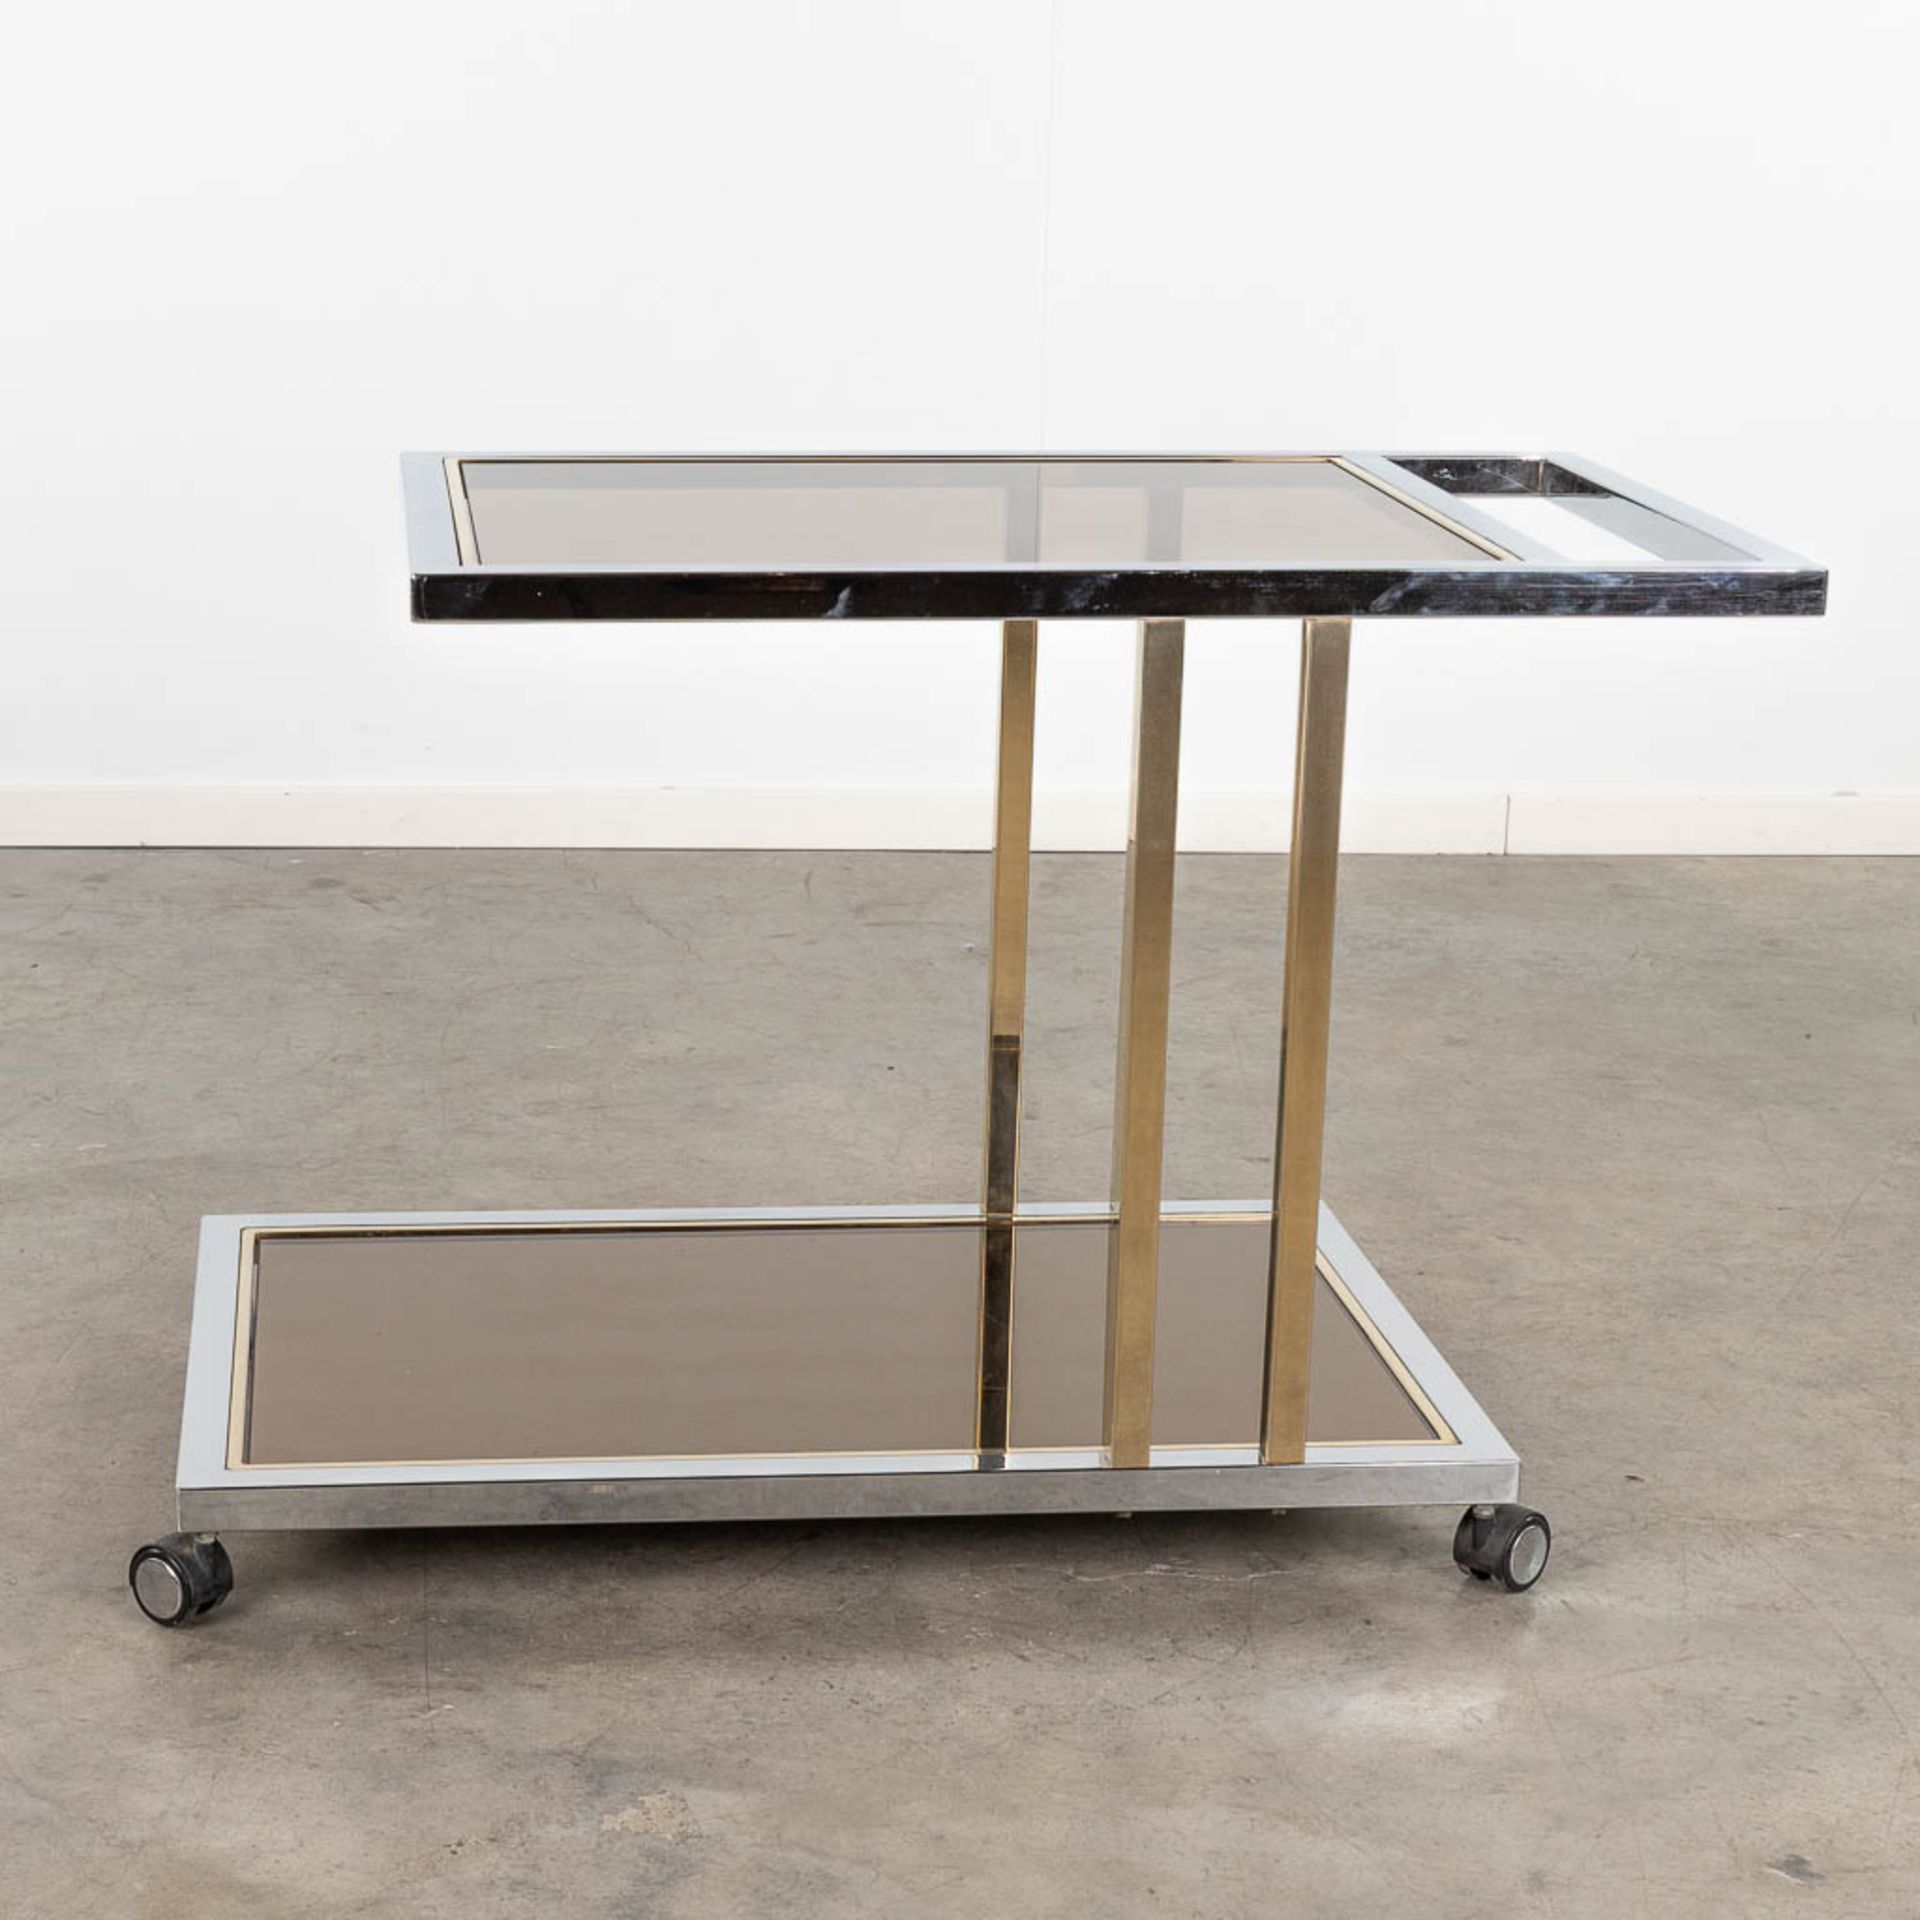 Belgo Chrome, a chromed and gold-plated bar cart. Circa 1980. (L: 53 x W: 100 x H: 67 cm) - Image 5 of 10